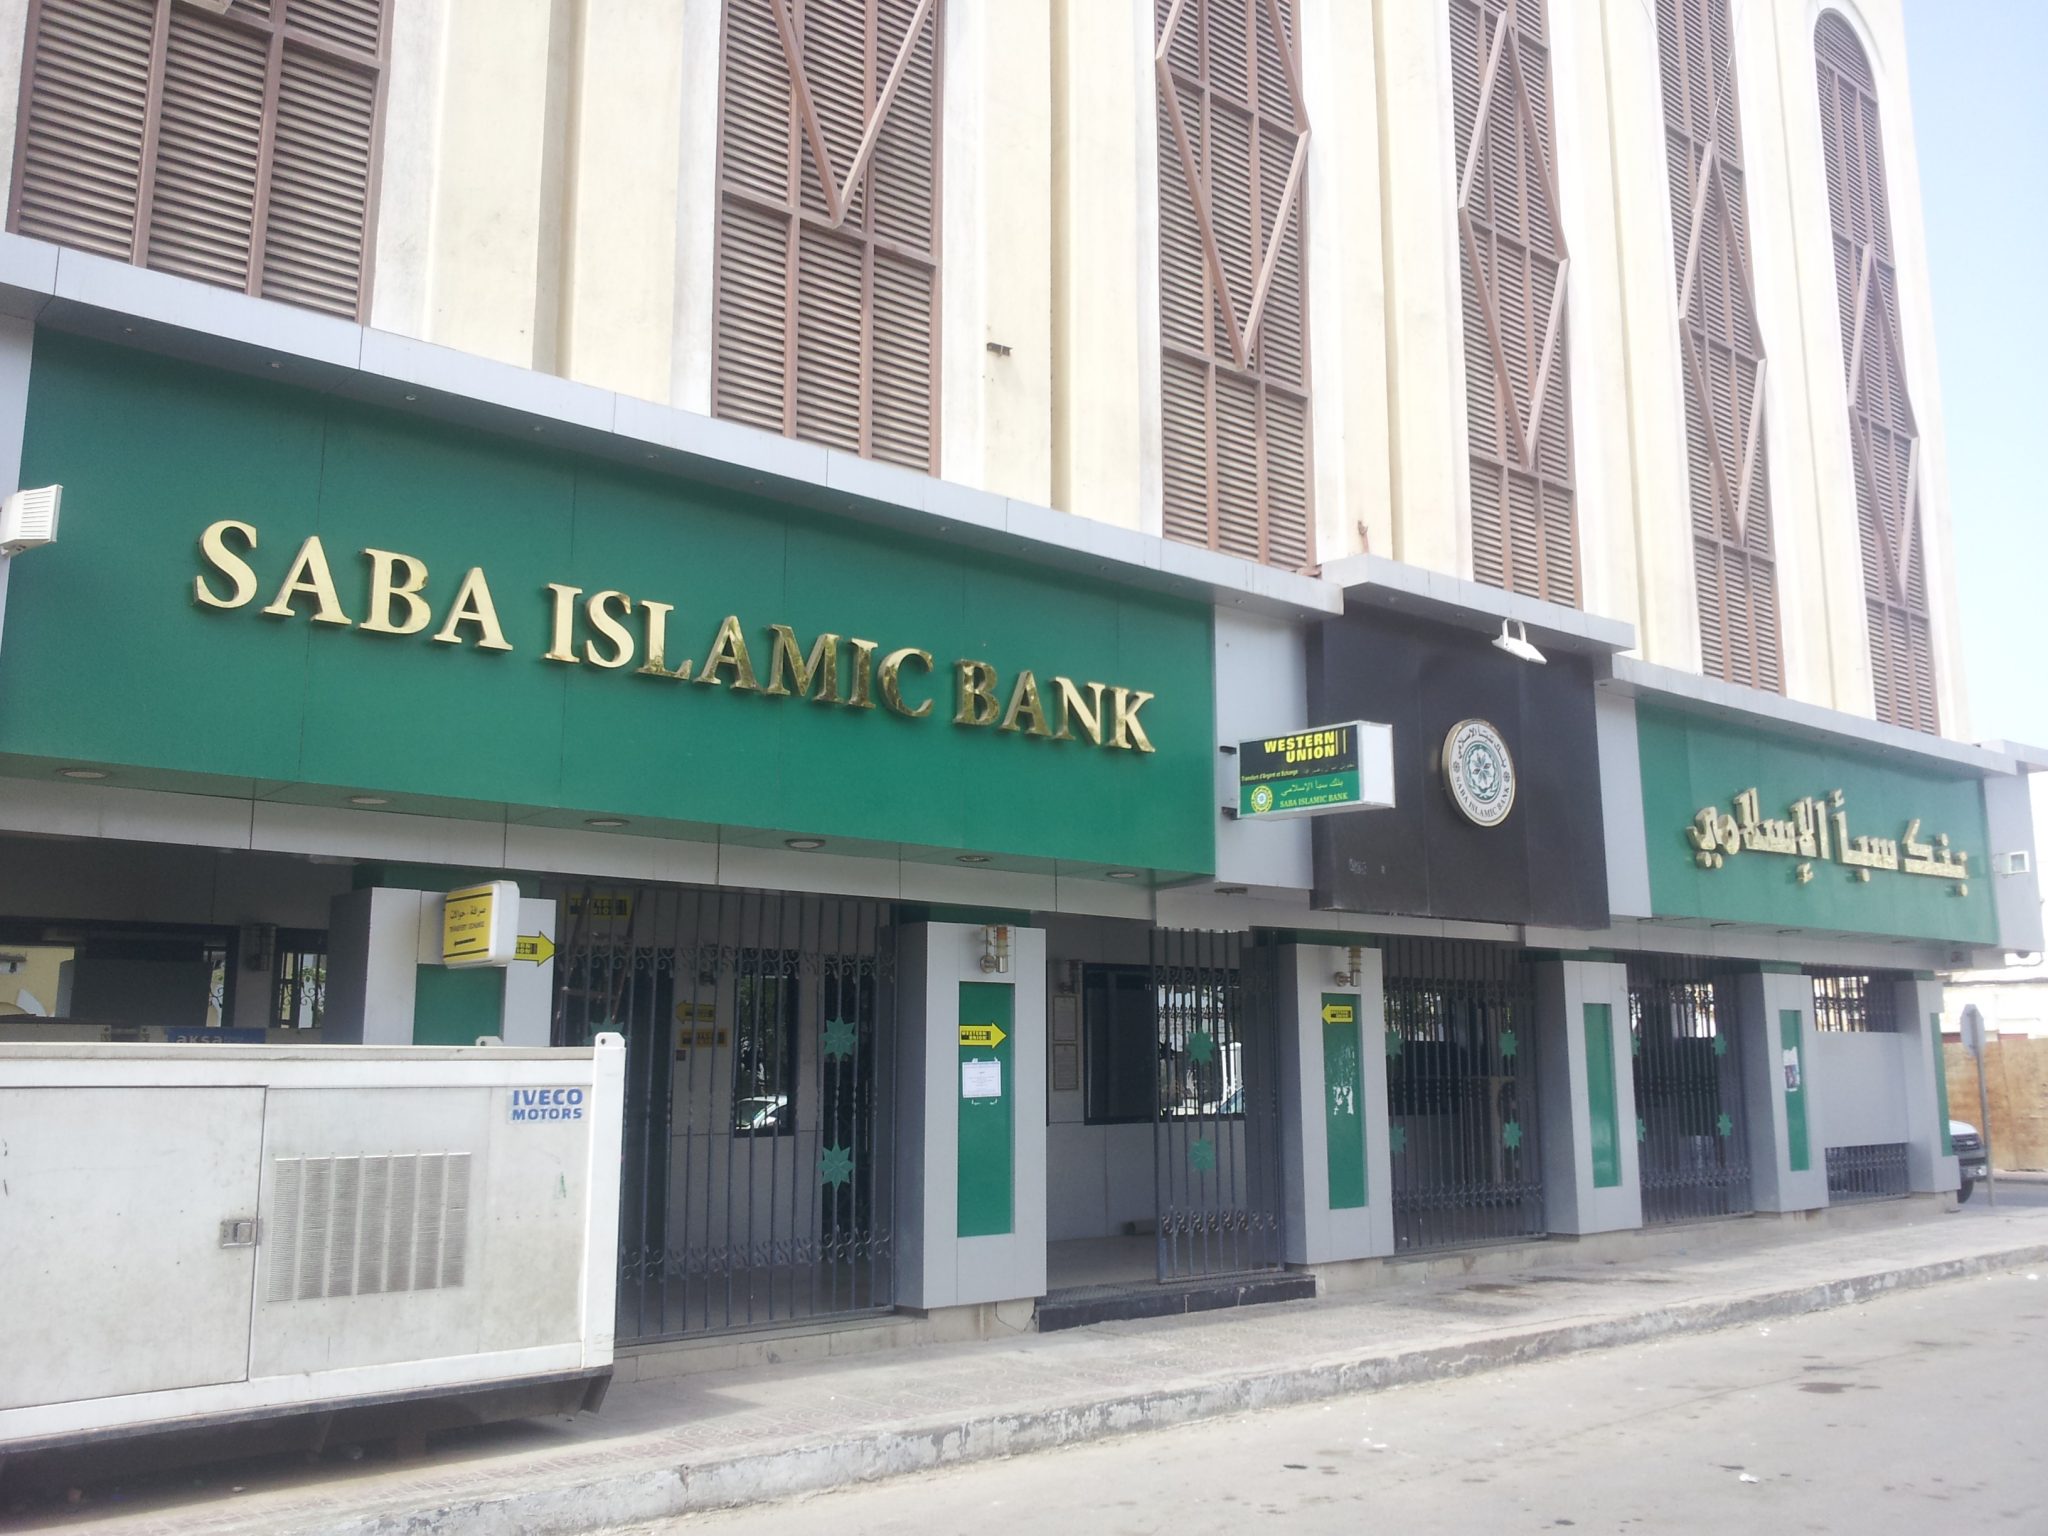 ‘Islam, for a Better World?’ – The World of Islamic Banking – Checks ...